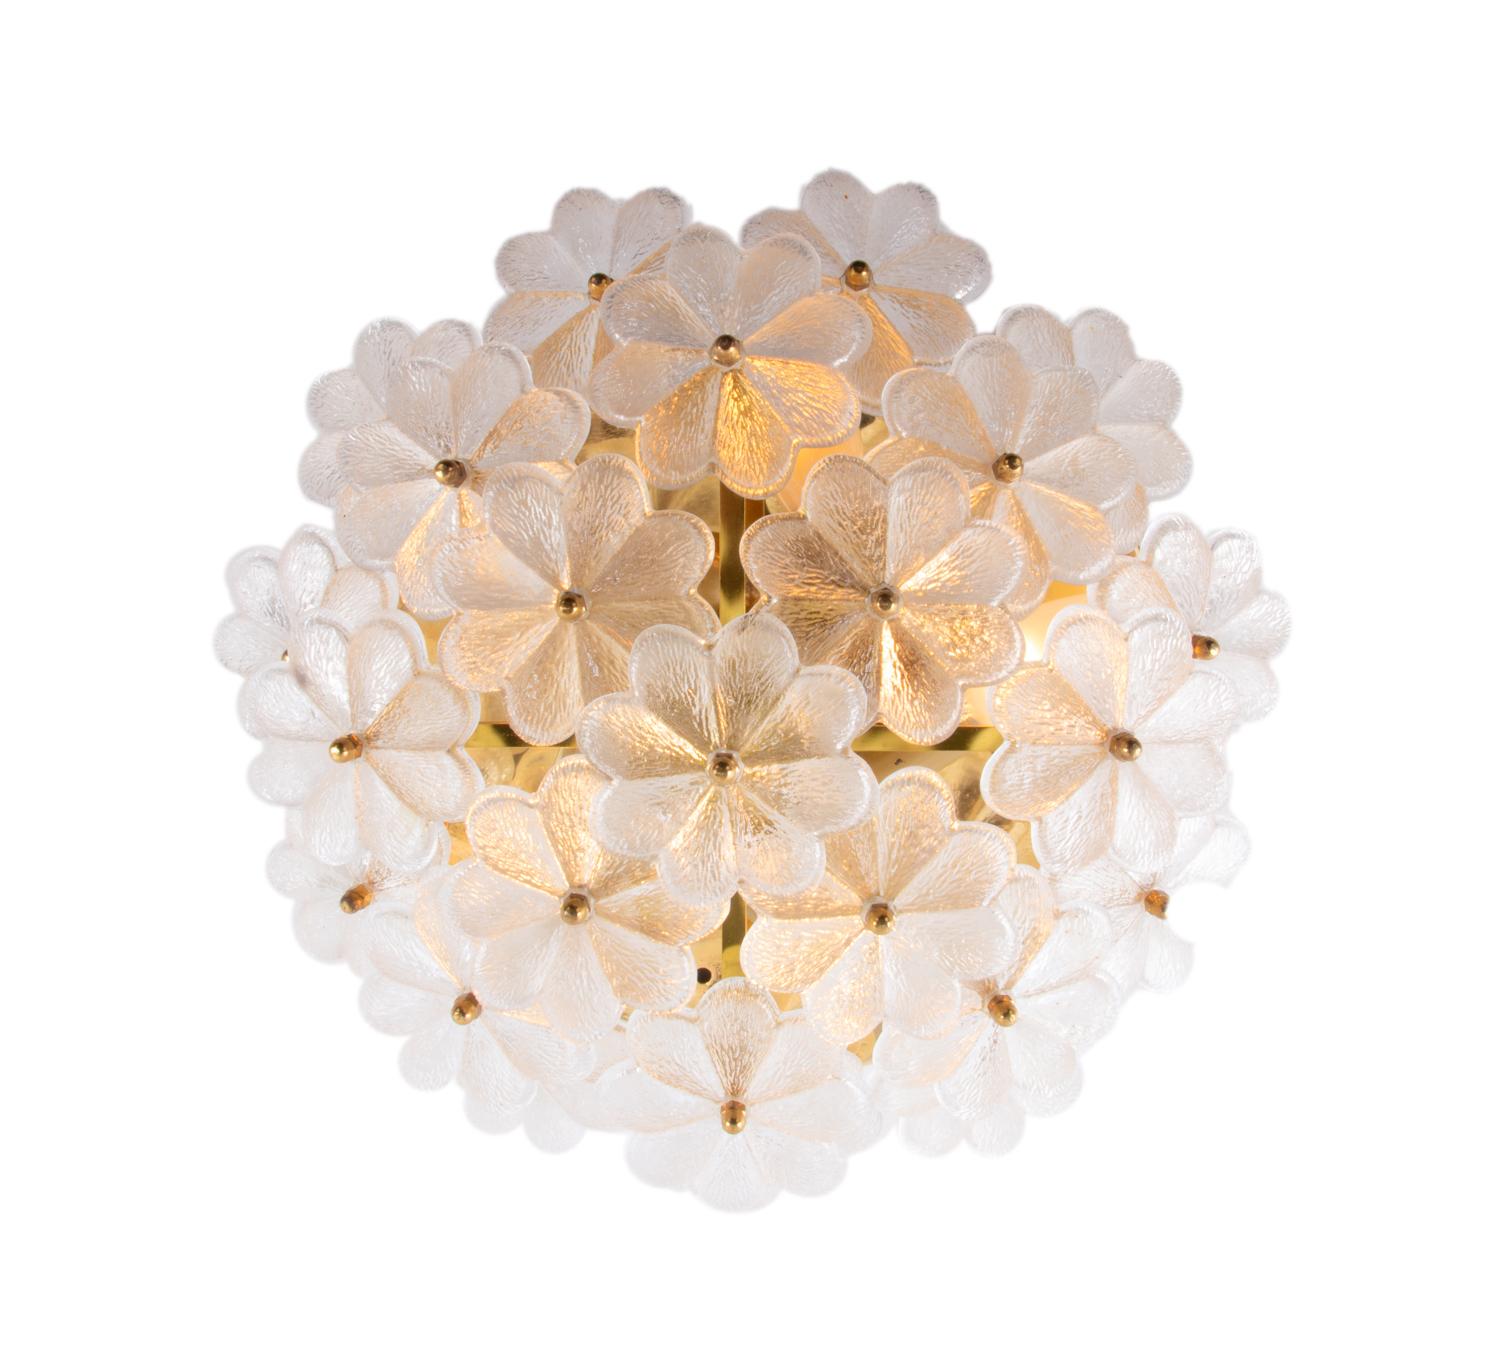 1 of 2 elegant crystal and brass flush mount wall or ceiling lamps with overlapping clear glass flowers manufactured in the 1960s by Palwa (Palme & Walter), Germany.

Design: Ernst Palme. 
Measures: diameter appr. 14